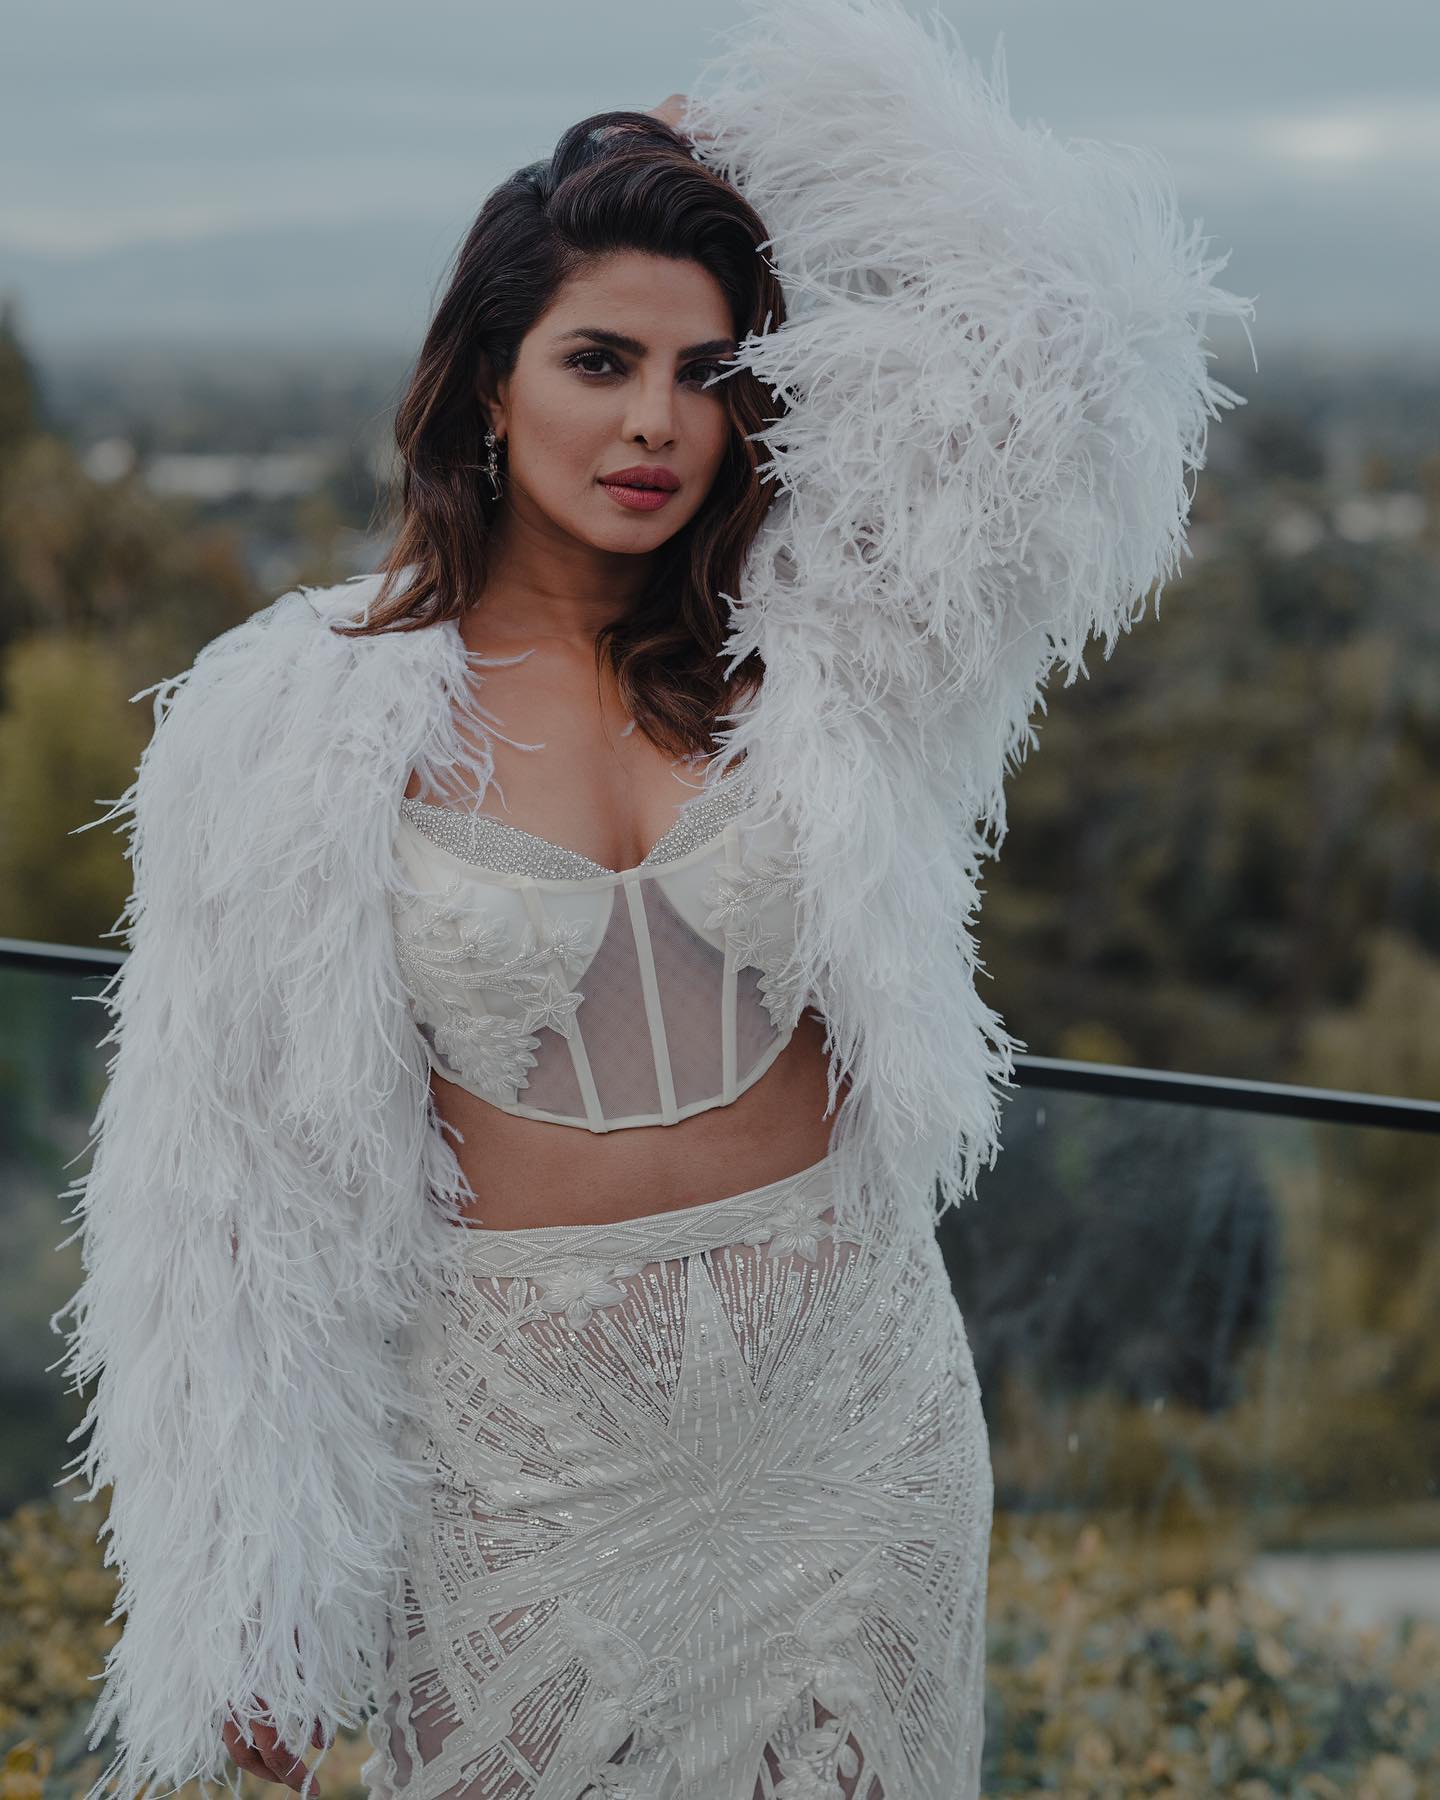 Priyanka Chopra gives fashion goals to fans with her unique outfit 8990